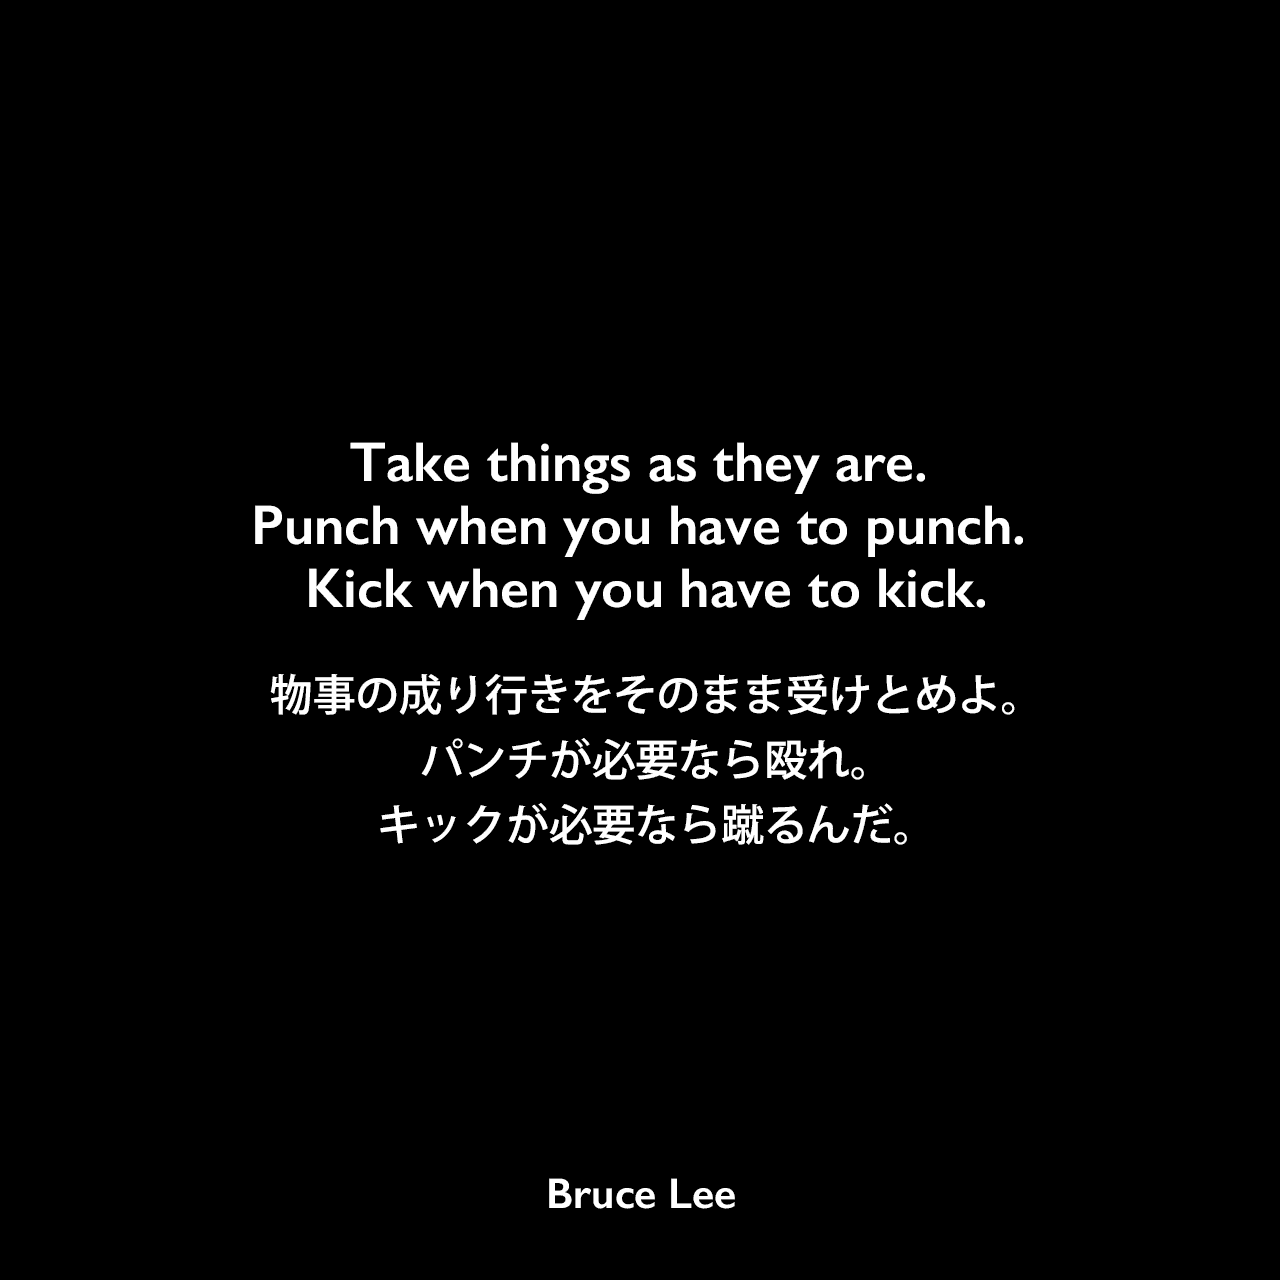 Take things as they are. Punch when you have to punch. Kick when you have to kick.物事の成り行きをそのまま受けとめよ。パンチが必要なら殴れ。キックが必要なら蹴るんだ。Bruce Lee